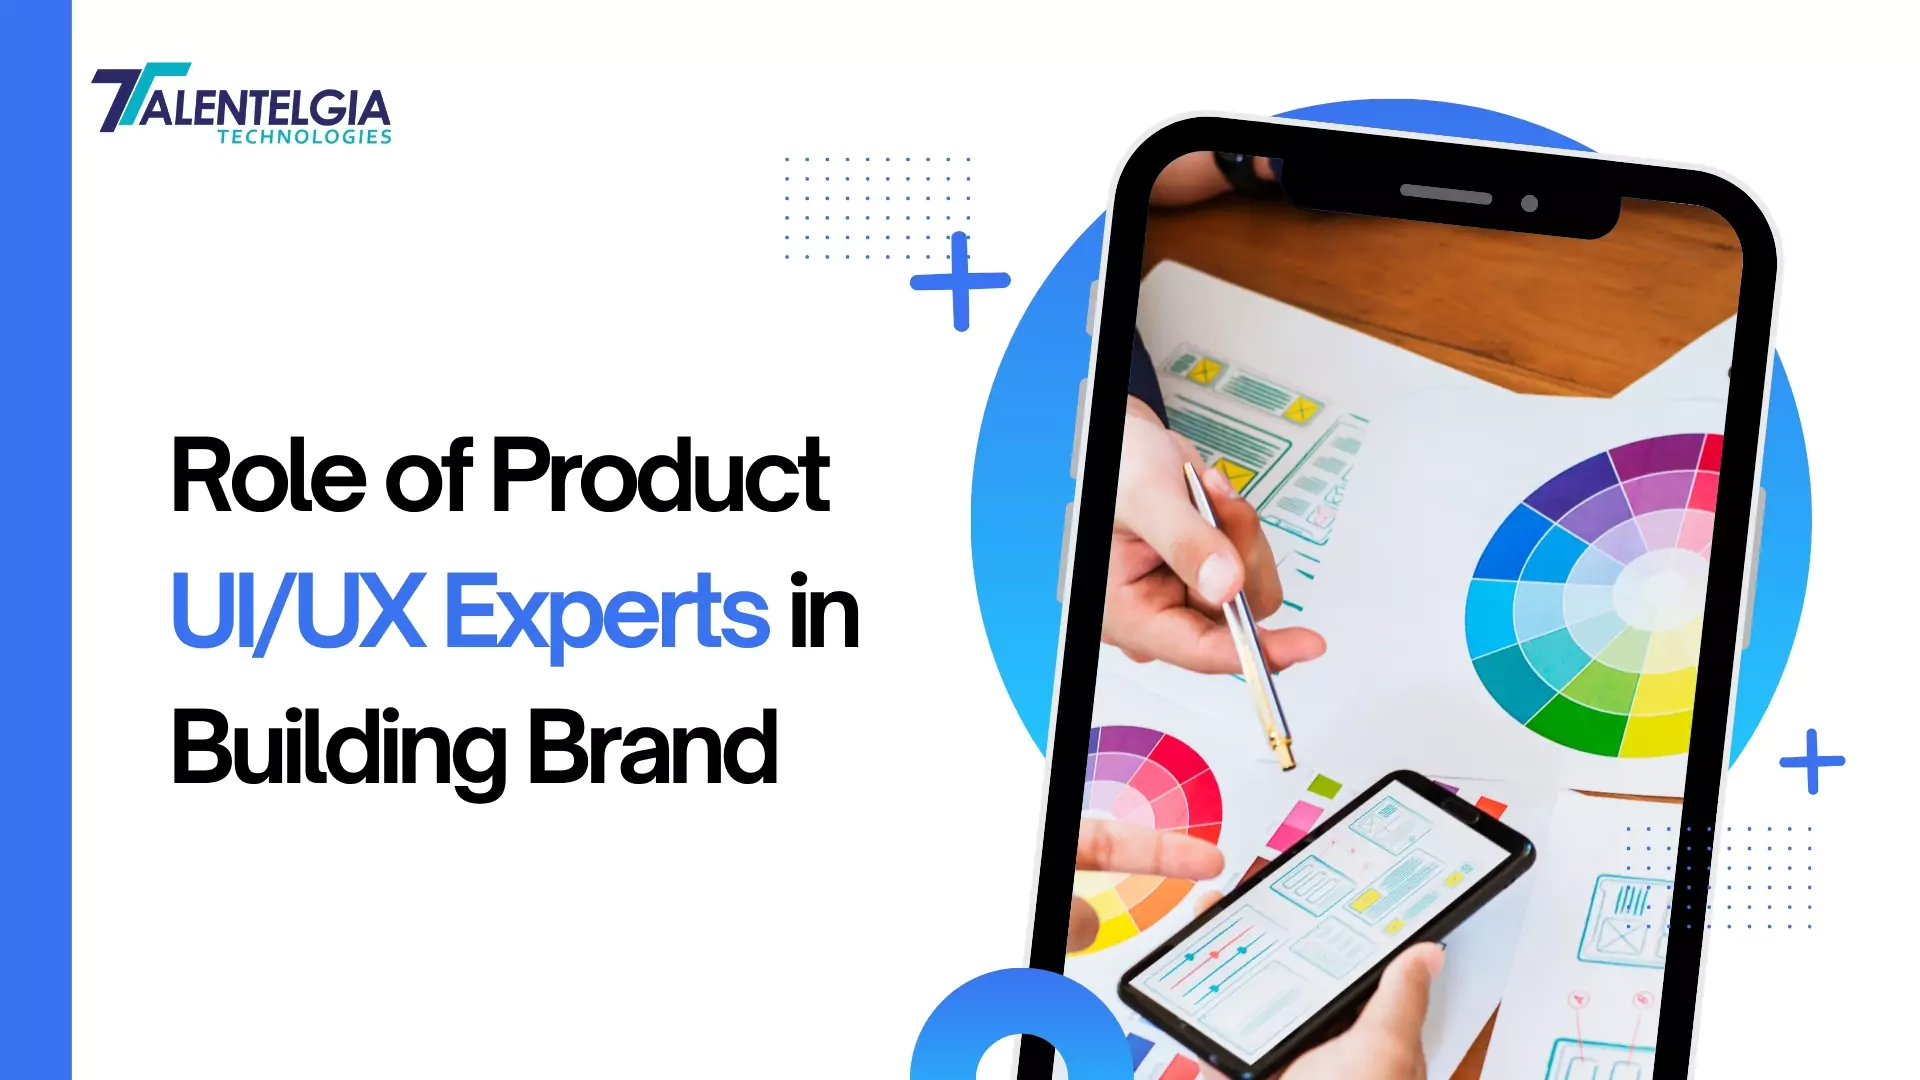 Role of Product UI/UX Experts